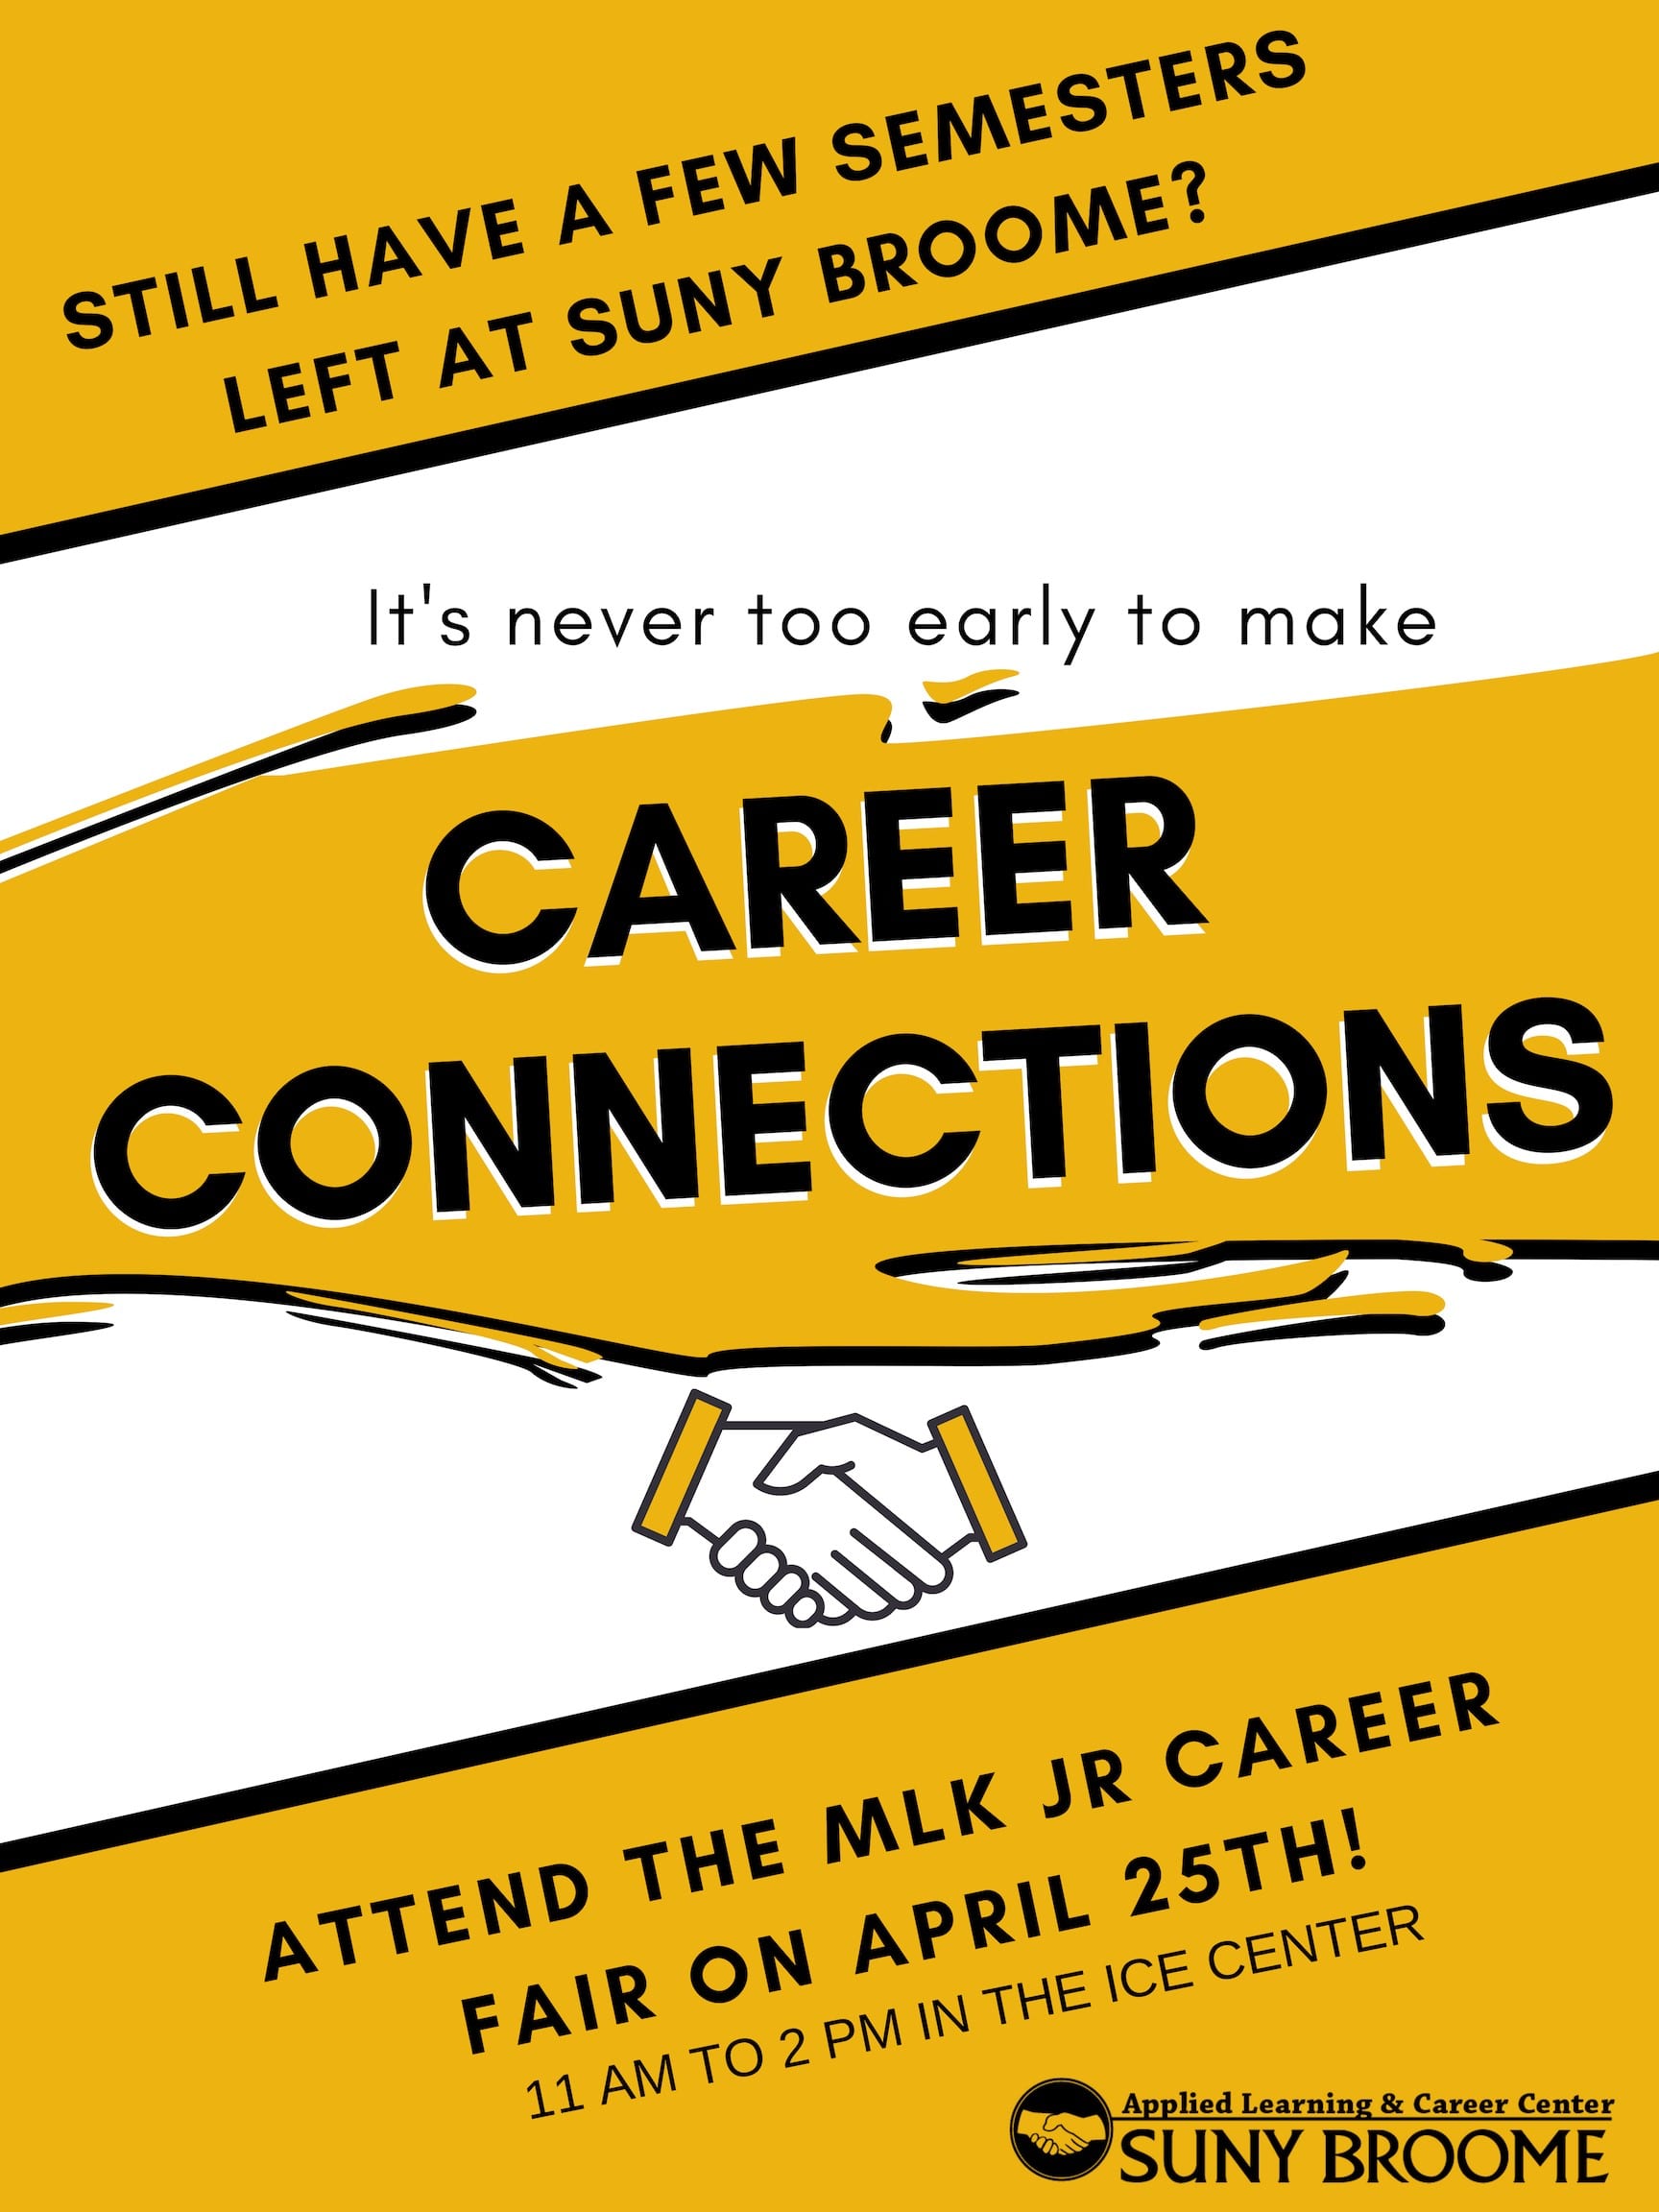 It’s never too early to make career connections!